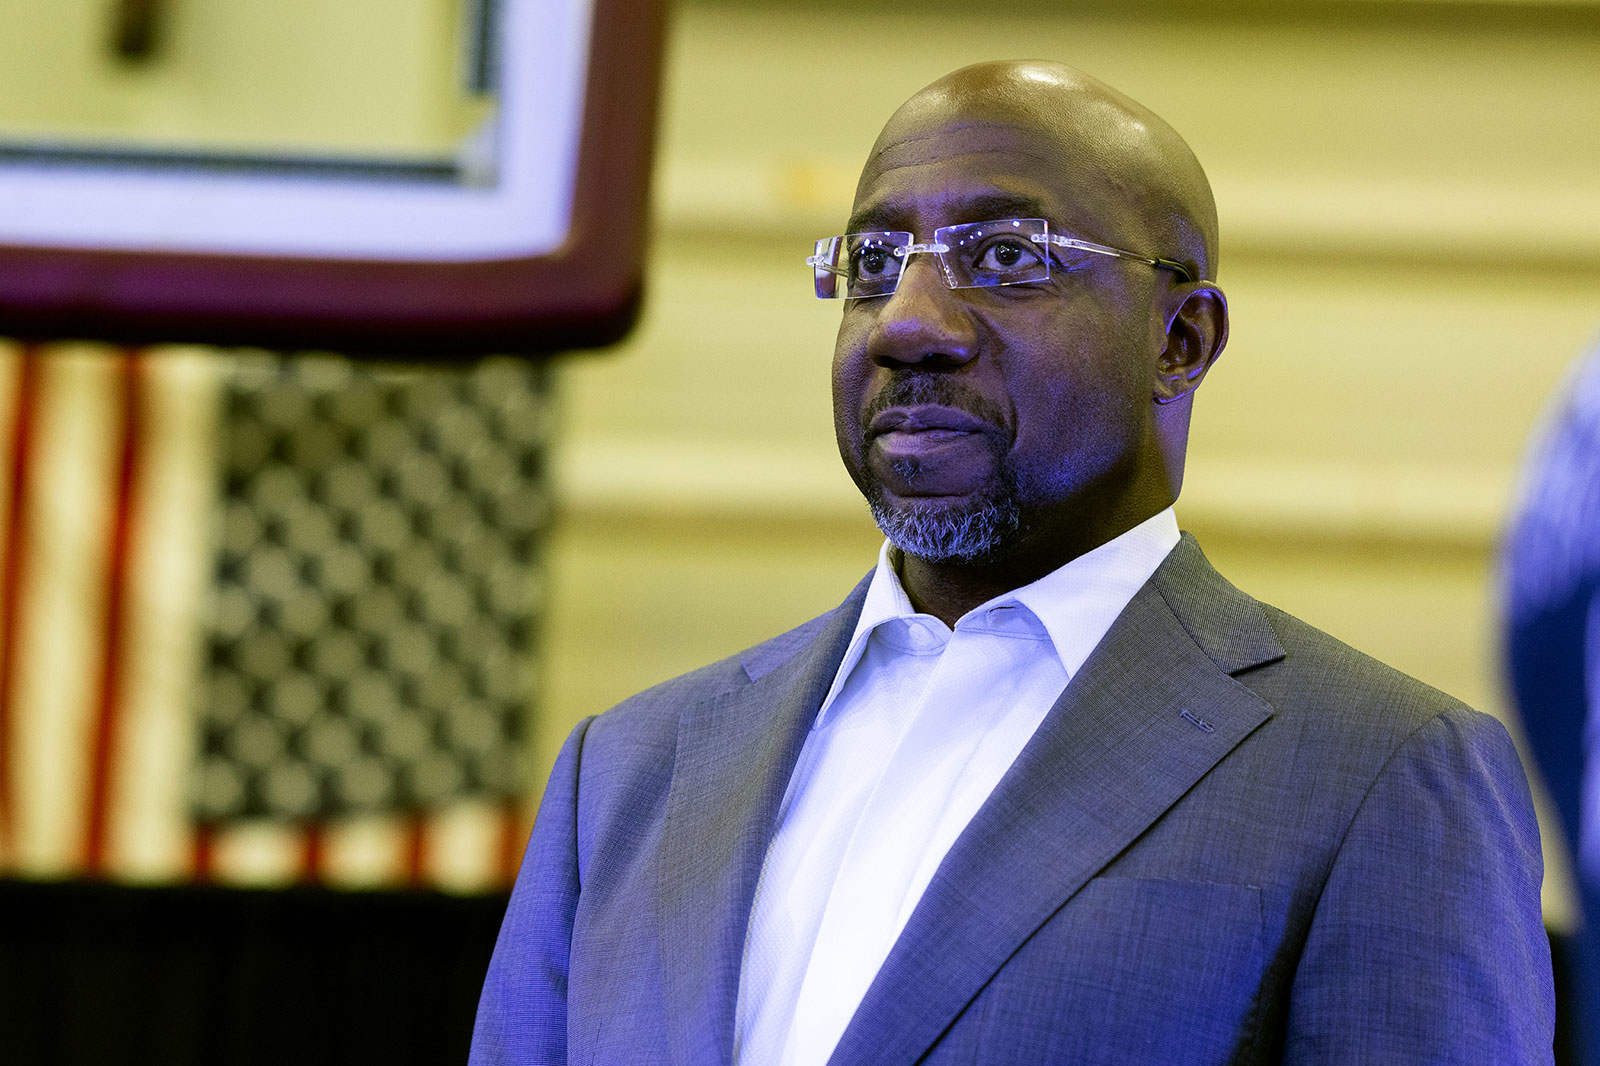 Sen. Raphael Warnock speaks during rapper Lil Baby's charity event at Morehouse College on November 13, in Atlanta.